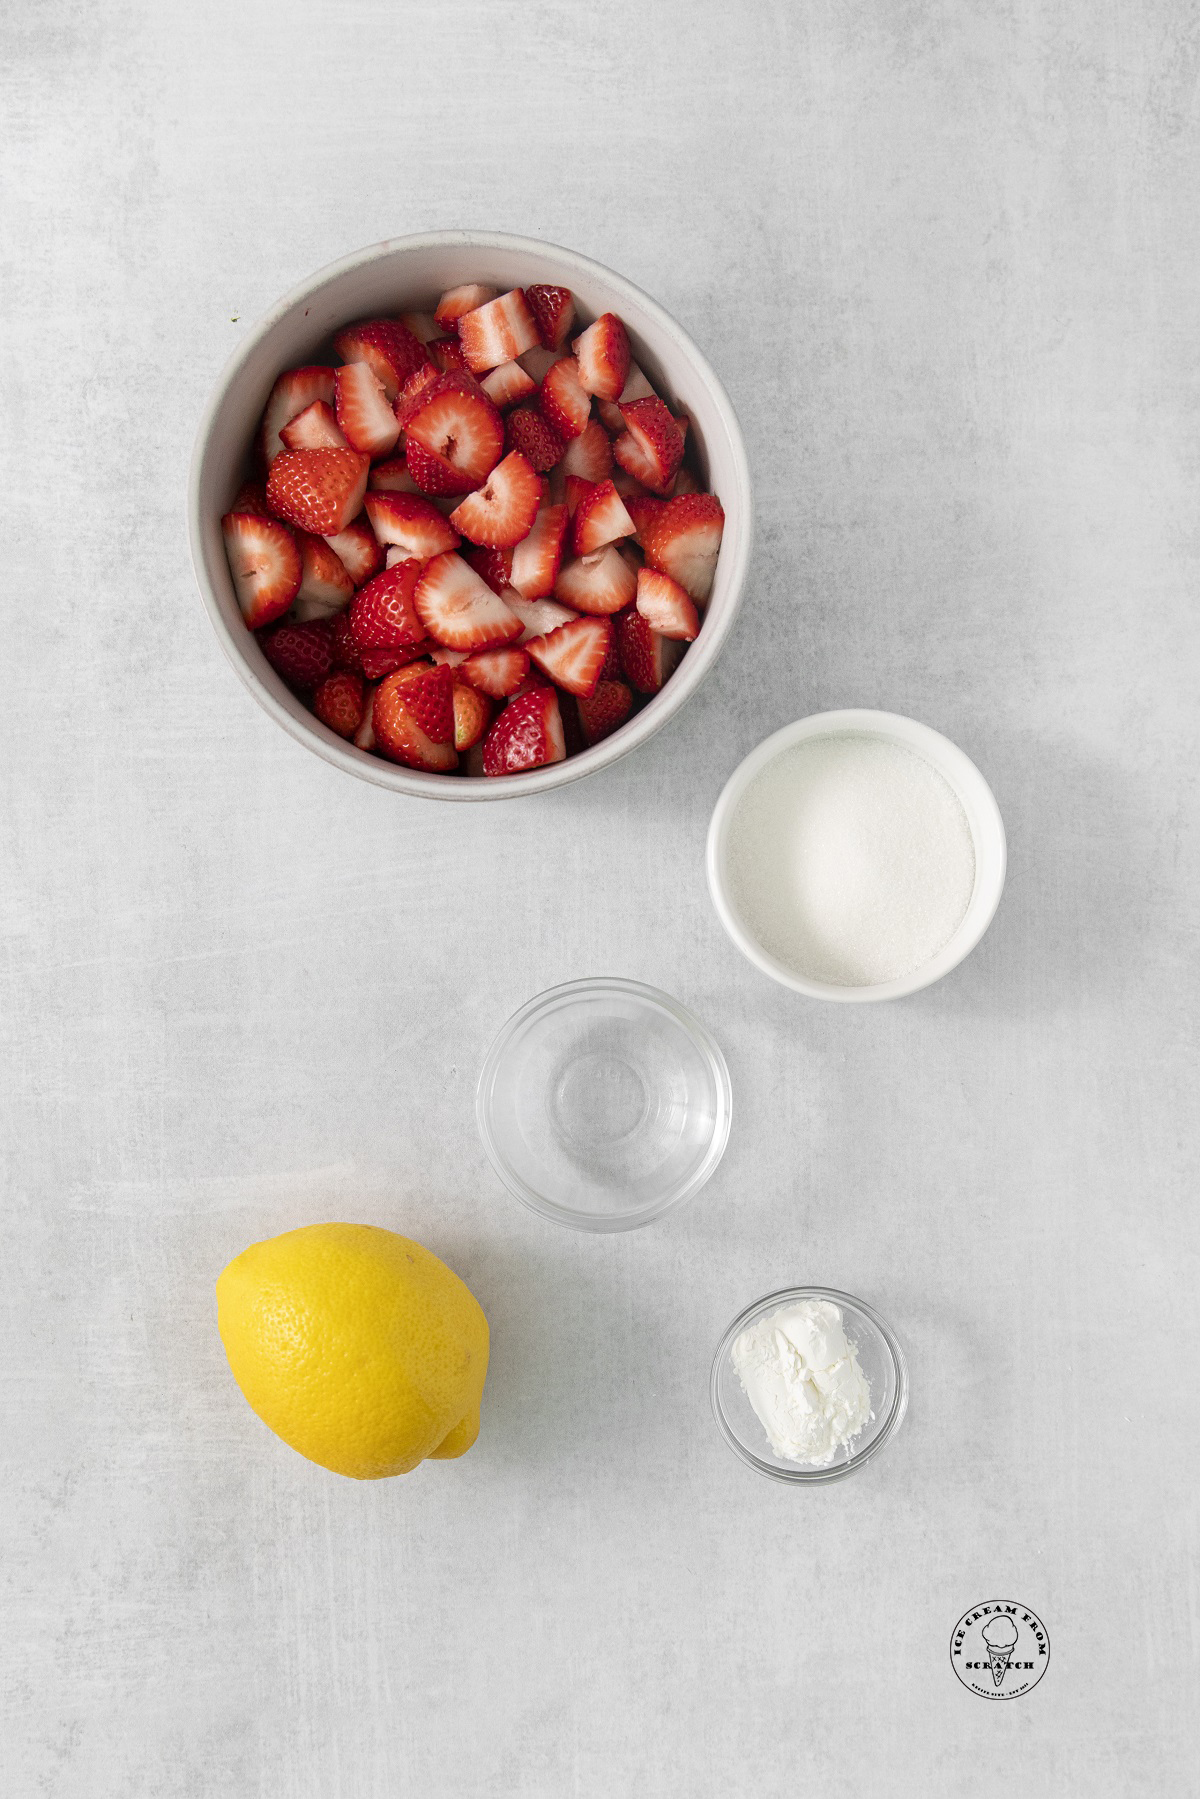 the ingredients for the strawberry compote, including fresh berries, sugar and lemon.